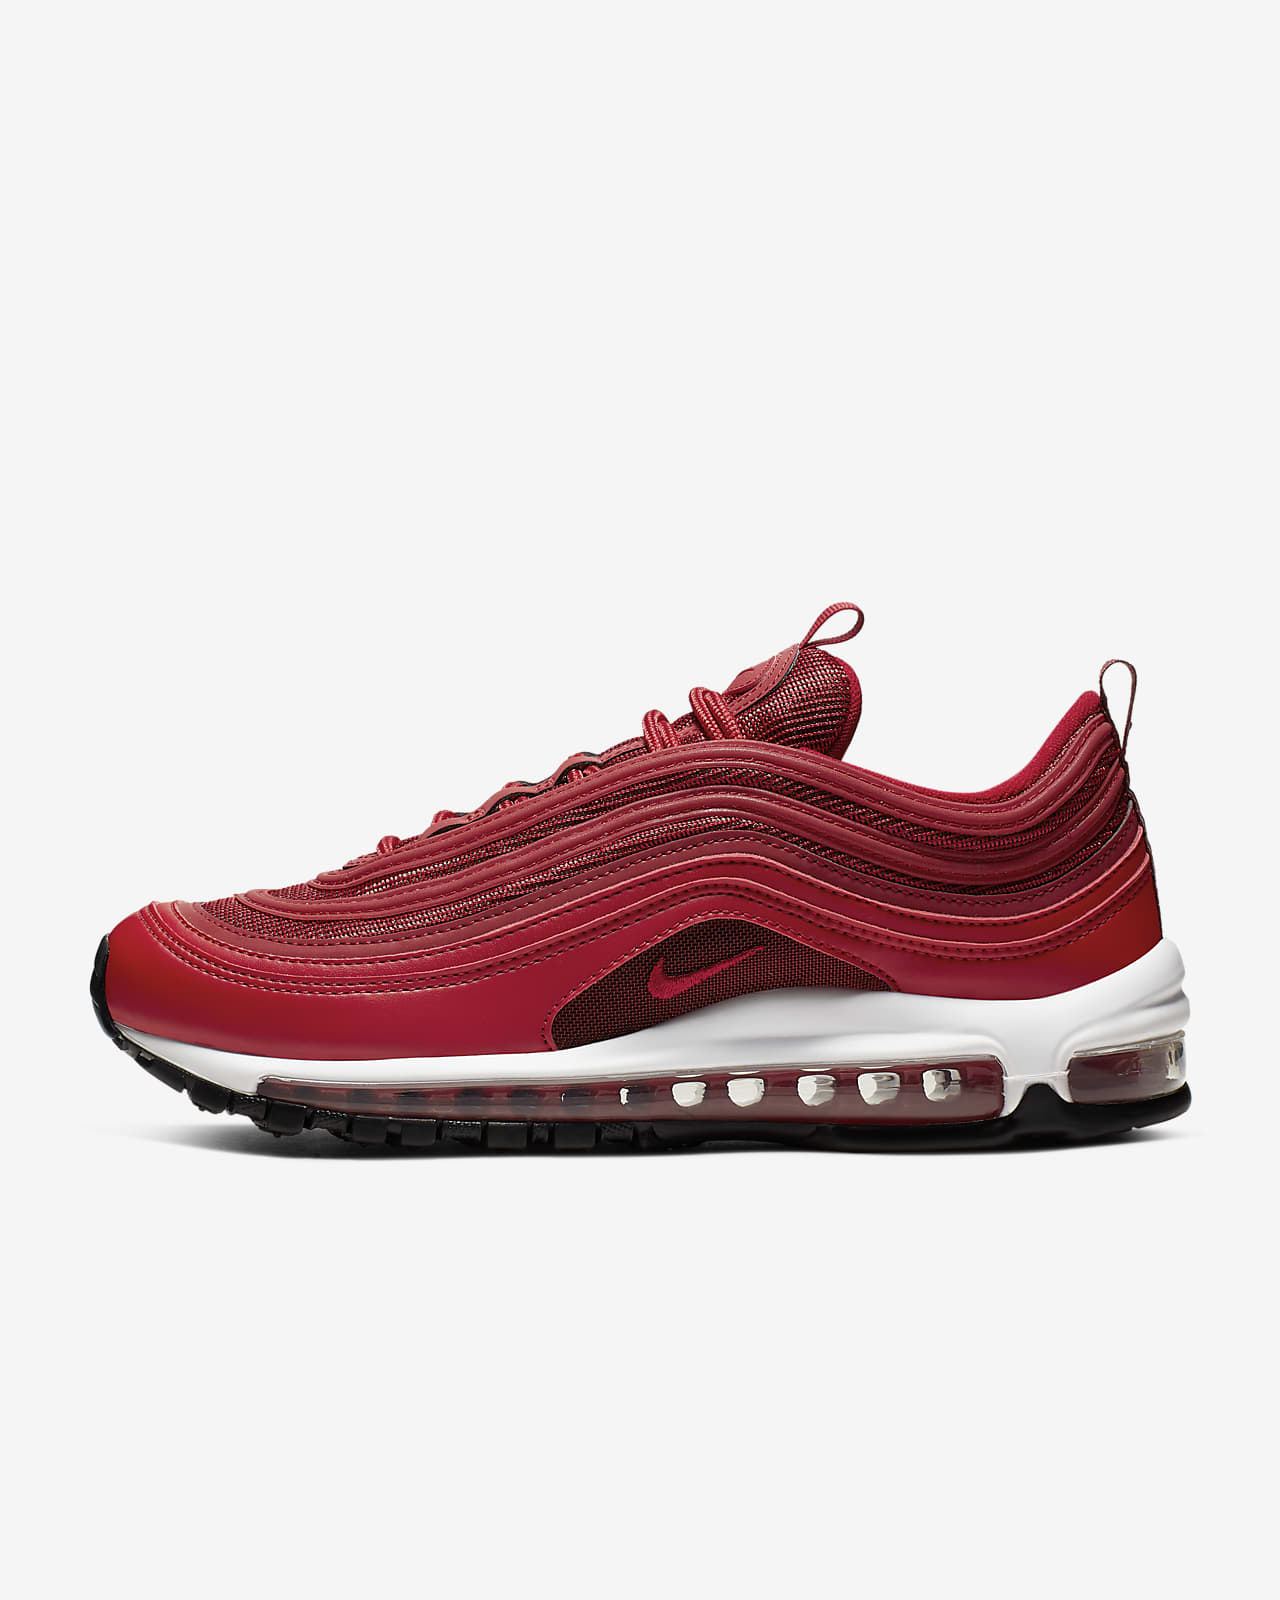 nike air max 97 fit true to size